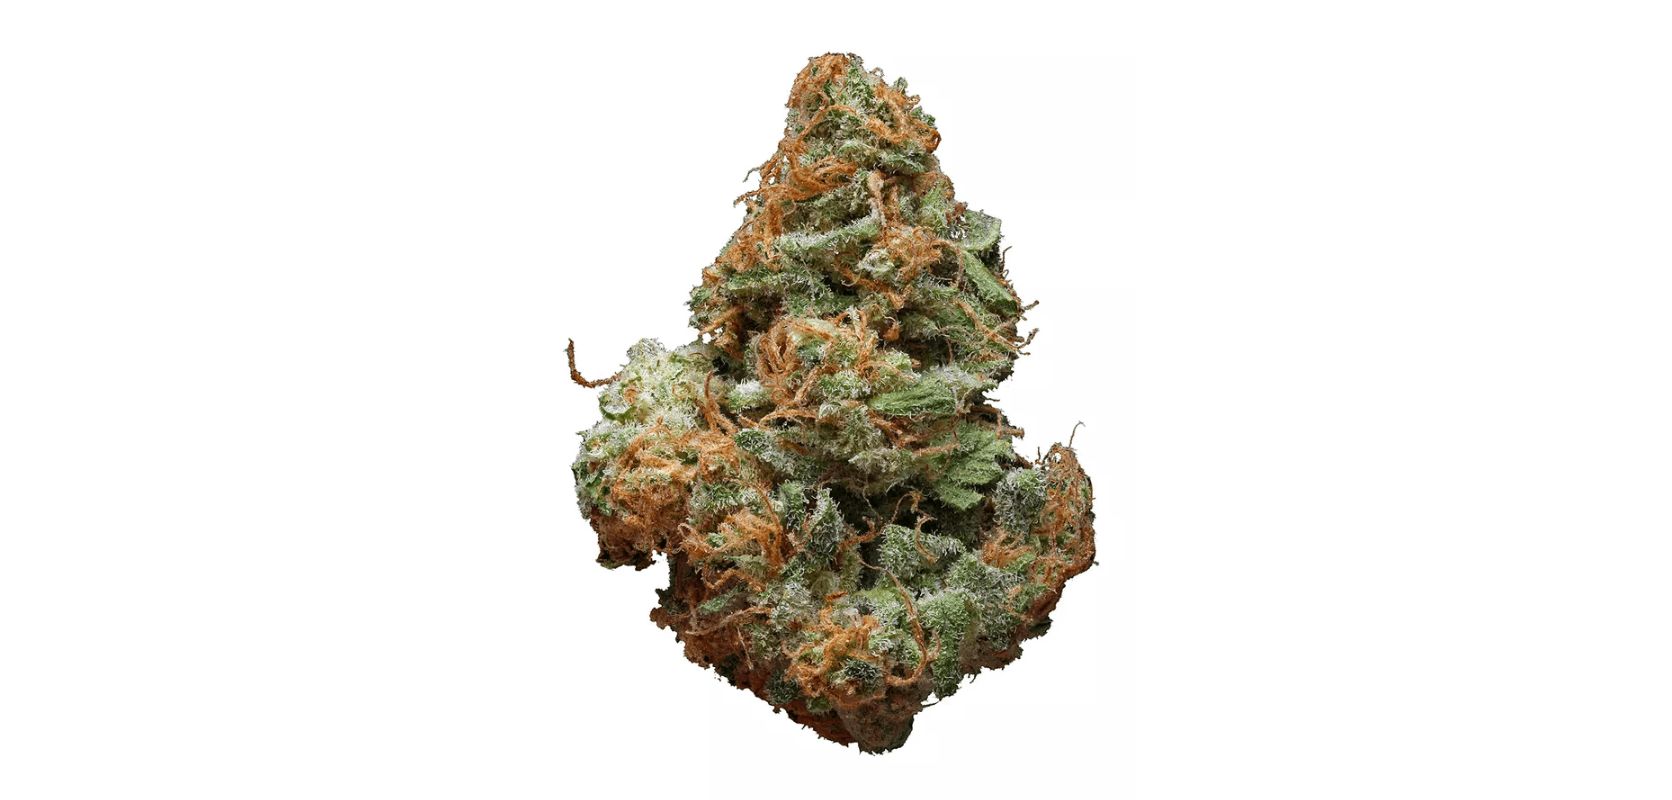 Believe it or not, the mighty Blue Cheese is recognized far and wide as one of the dankest, most potent Indica-dominant strains on the Canadian weed scene. 